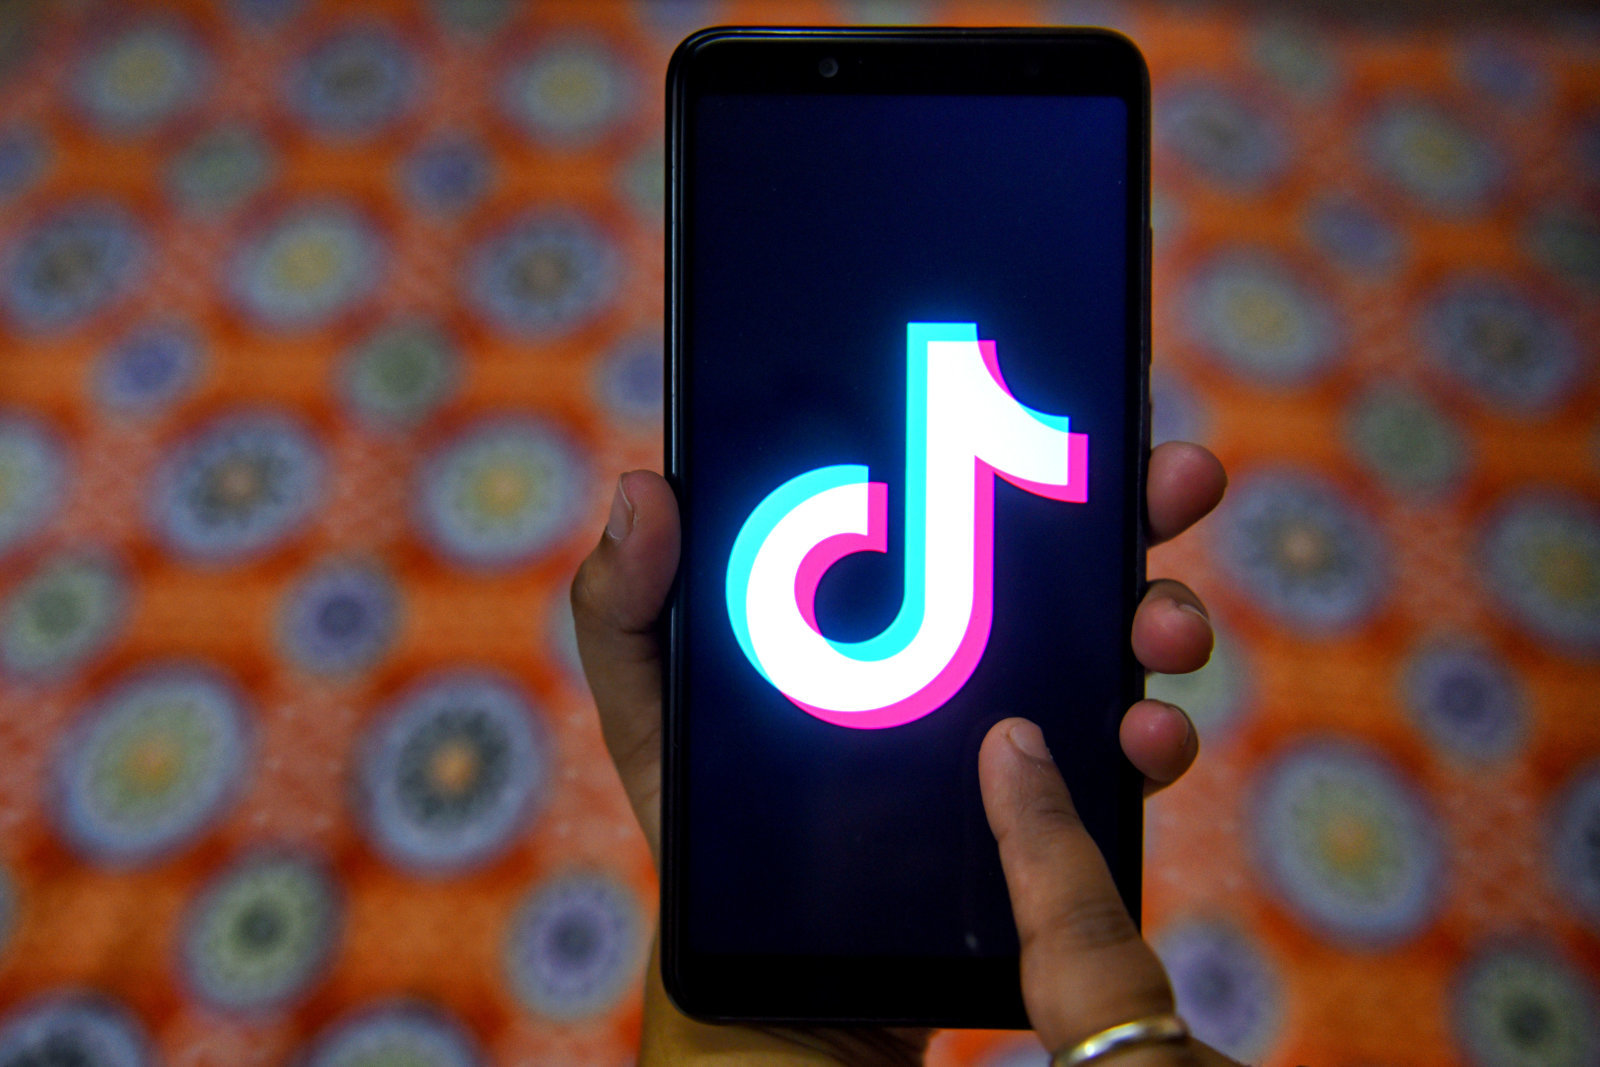 KOLKATA, WEST BENGAL, INDIA - 2019/04/17: The tiktok application sign seen on a screen of an Android phone, the application has been banned from India. (Photo by Avishek Das/SOPA Images/LightRocket via Getty Images)